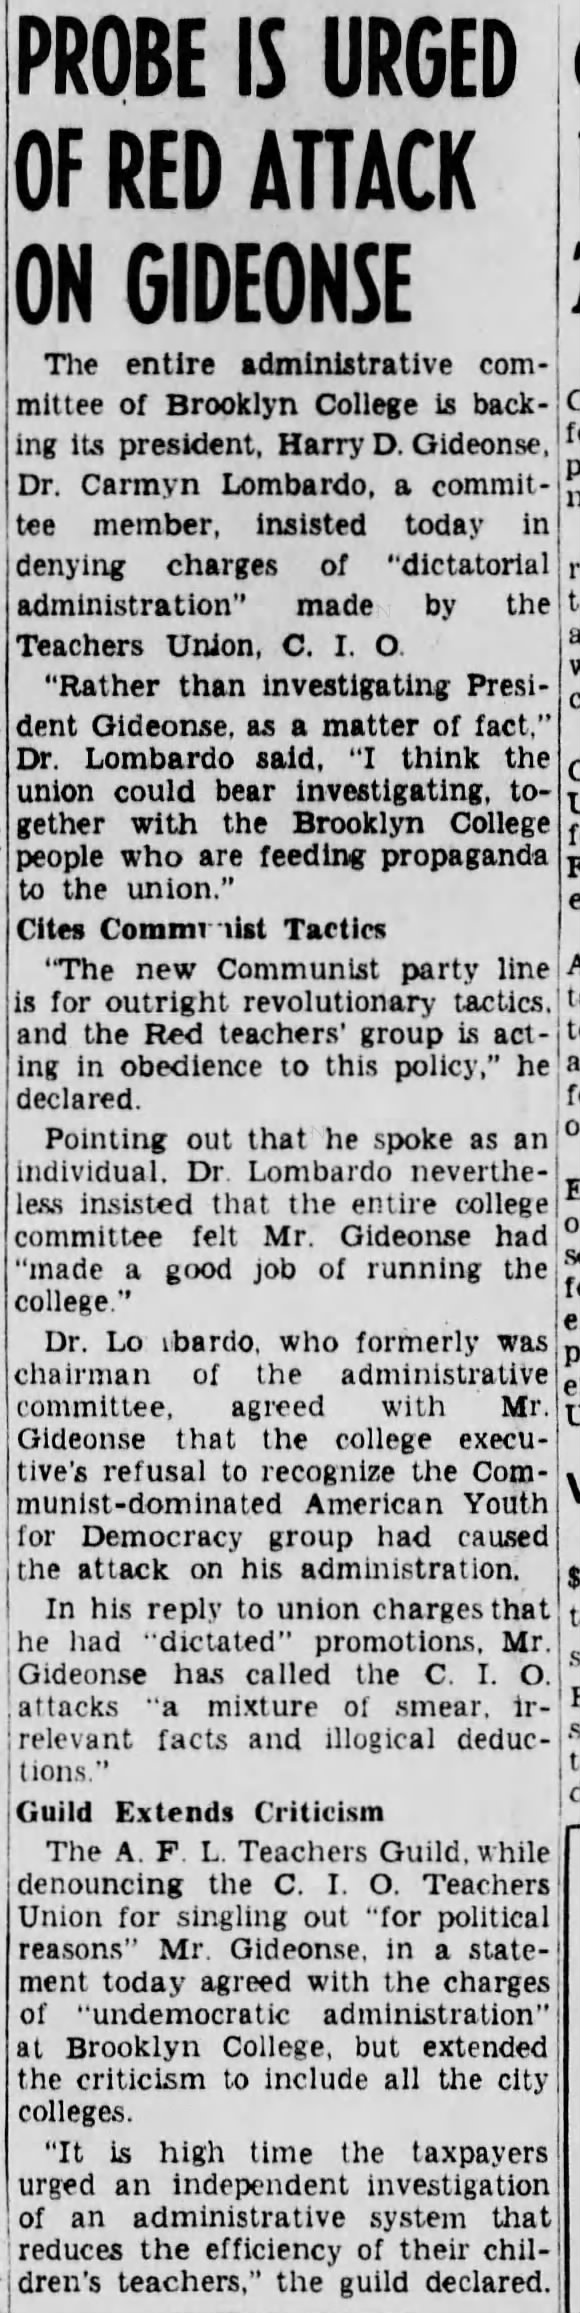 "Probe Is Urged of Red Attack on Gideonse," Brooklyn Eagle, May 7, 1946, 1